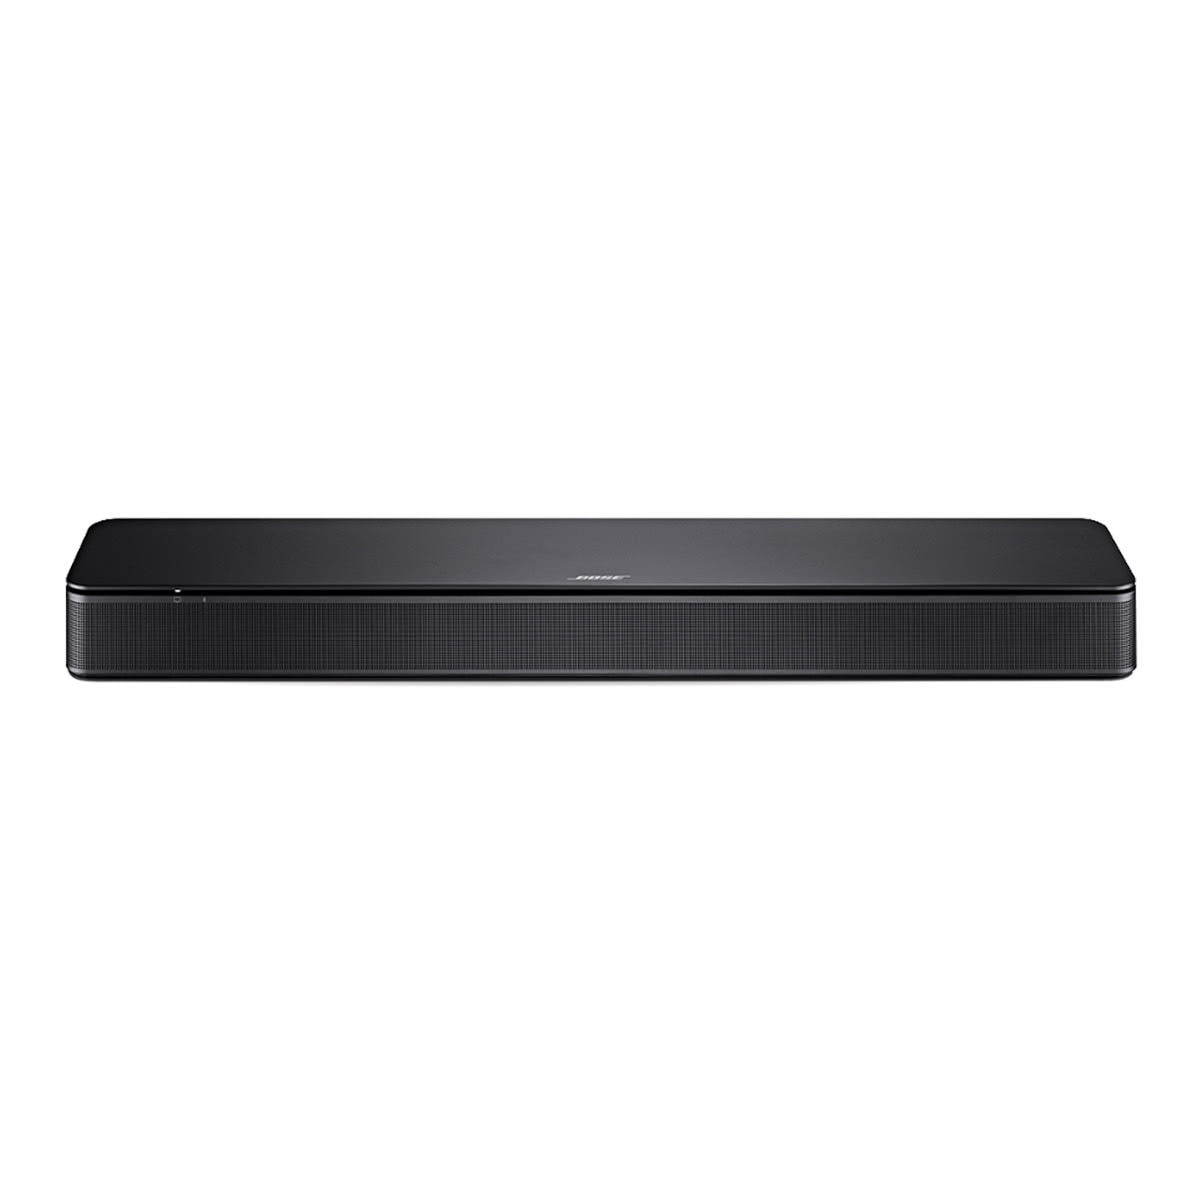 Bose TV Speaker with Bluetooth and HDMI-ARC (Black)